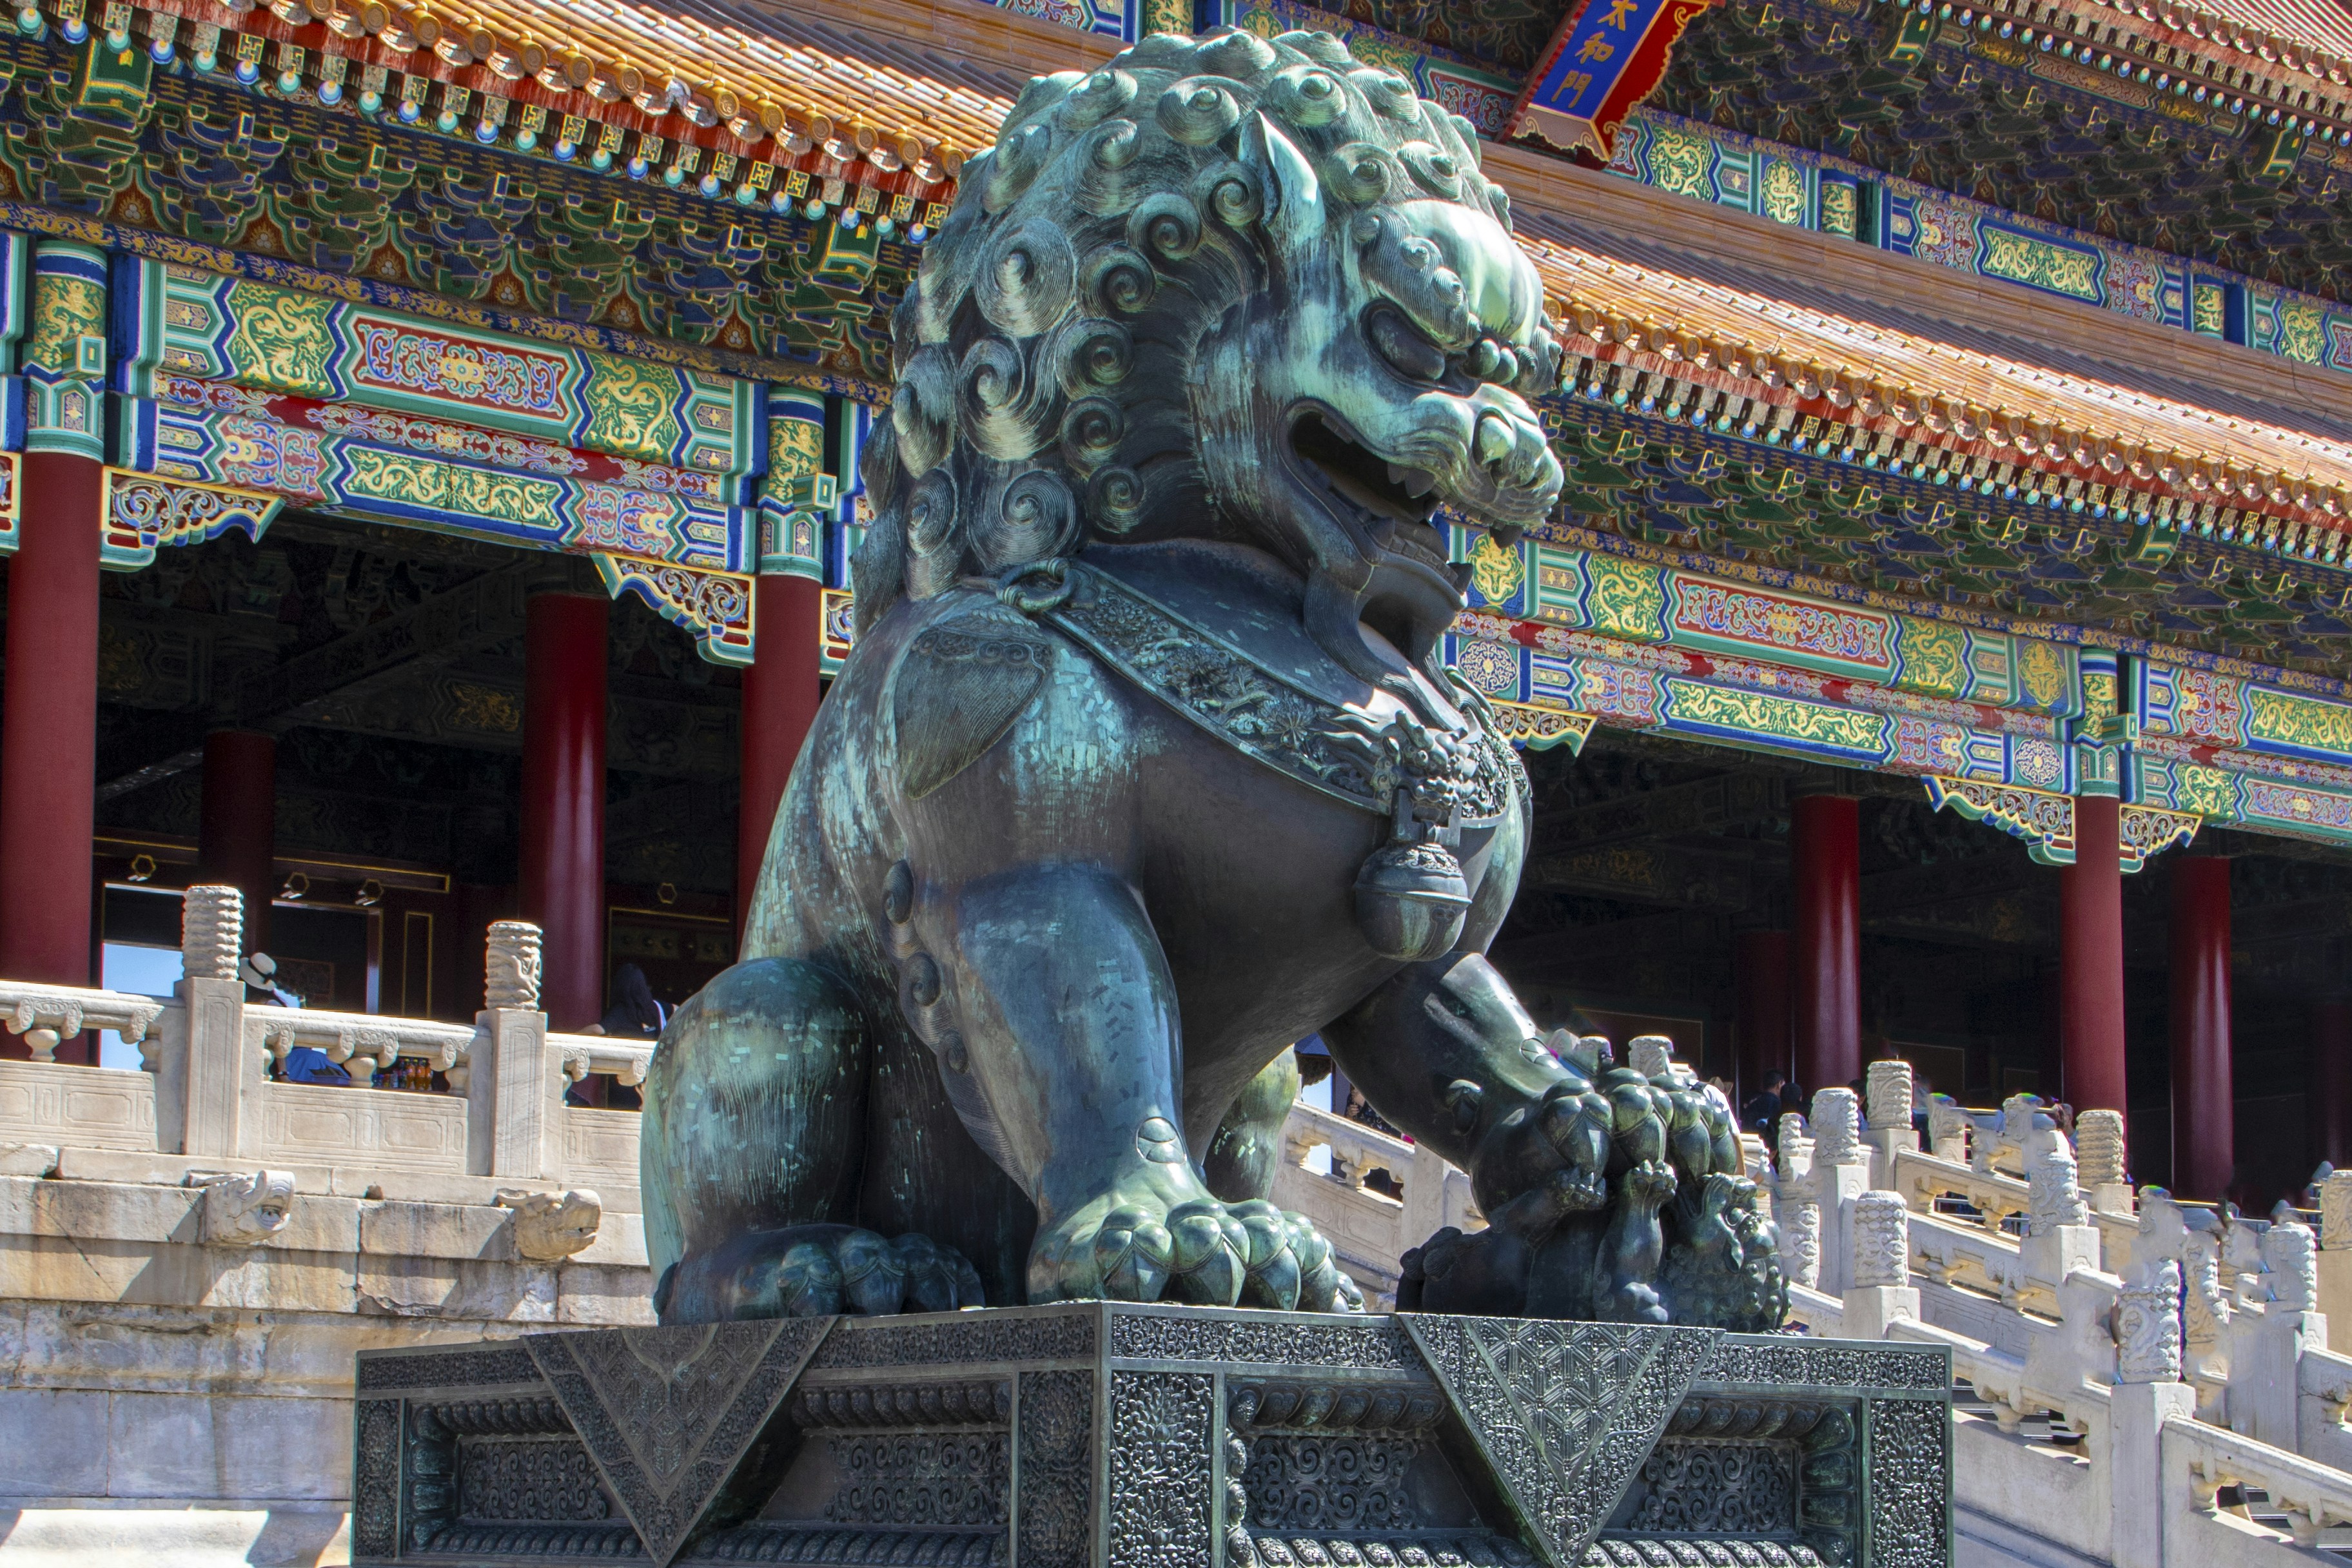 This is an Imperial Chinese Lioness in the grounds of the Forbidden Palace, Beijing, which was constructed in the 1300s. Sometimes these are referred to as Foo Dogs and are in pairs. This is the female or lioness, as it is playing with a cub, under it’s paw. This represents nurture. They are often made of granite or cast in bronze. I was lucky enough to visit the Forbidden Palace, whilst speaking at an international leadership conference, being held in Beijing.